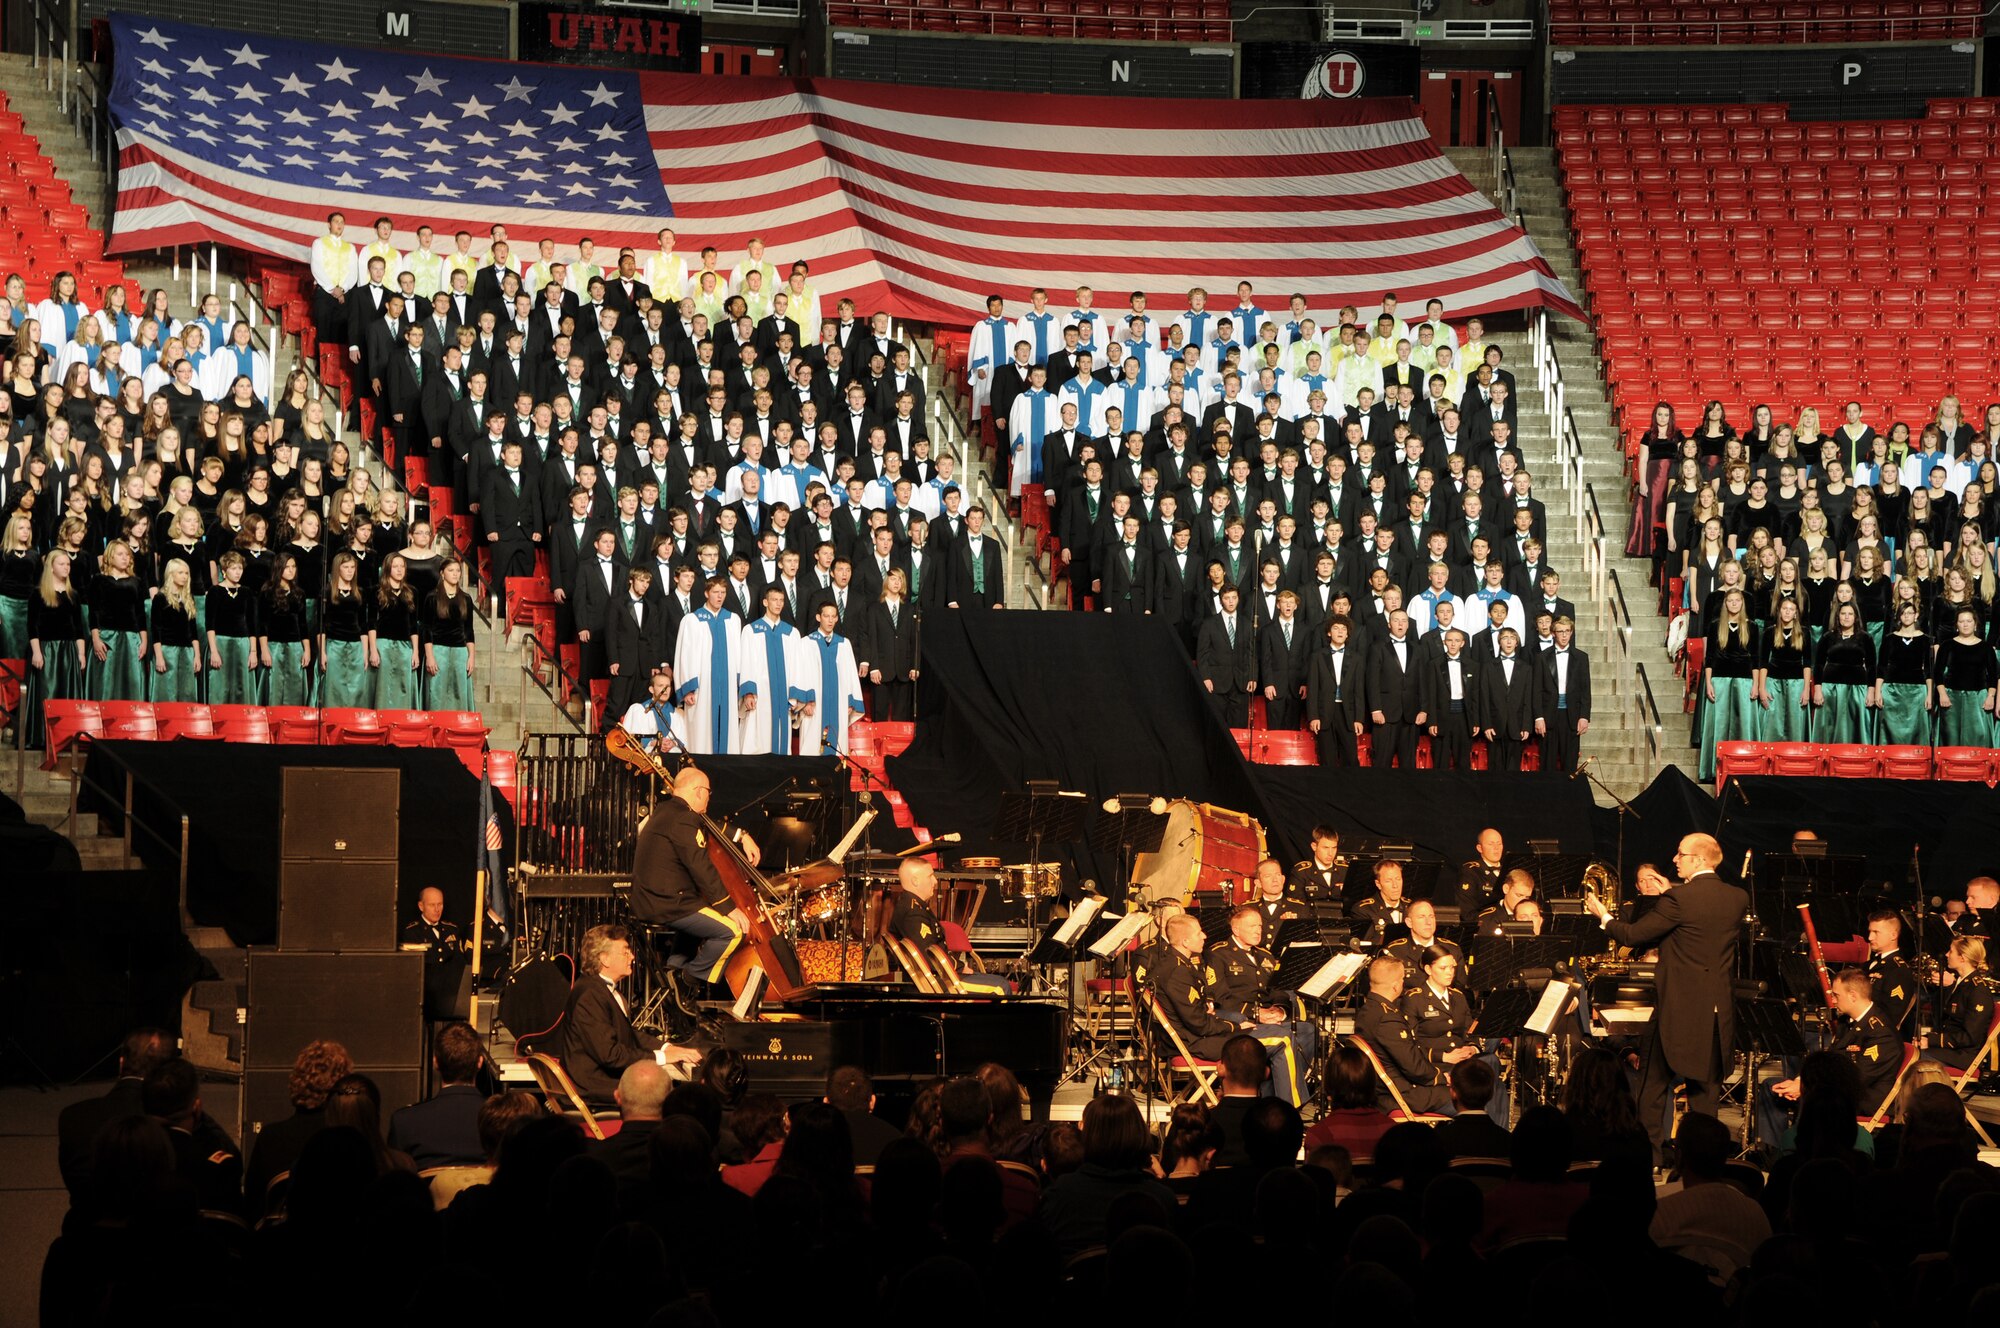 The Utah National Guard's 23rd Army Band and a 600-voice combined choir from Granite School District high schools performs at the Utah National Guard's 57th annual Veterans Day concert at the University of Utah's Jon M. Huntsman Center, Nov. 10. (U.S. Air Force photo by Senior Airman Lillian Harnden)(RELEASED)